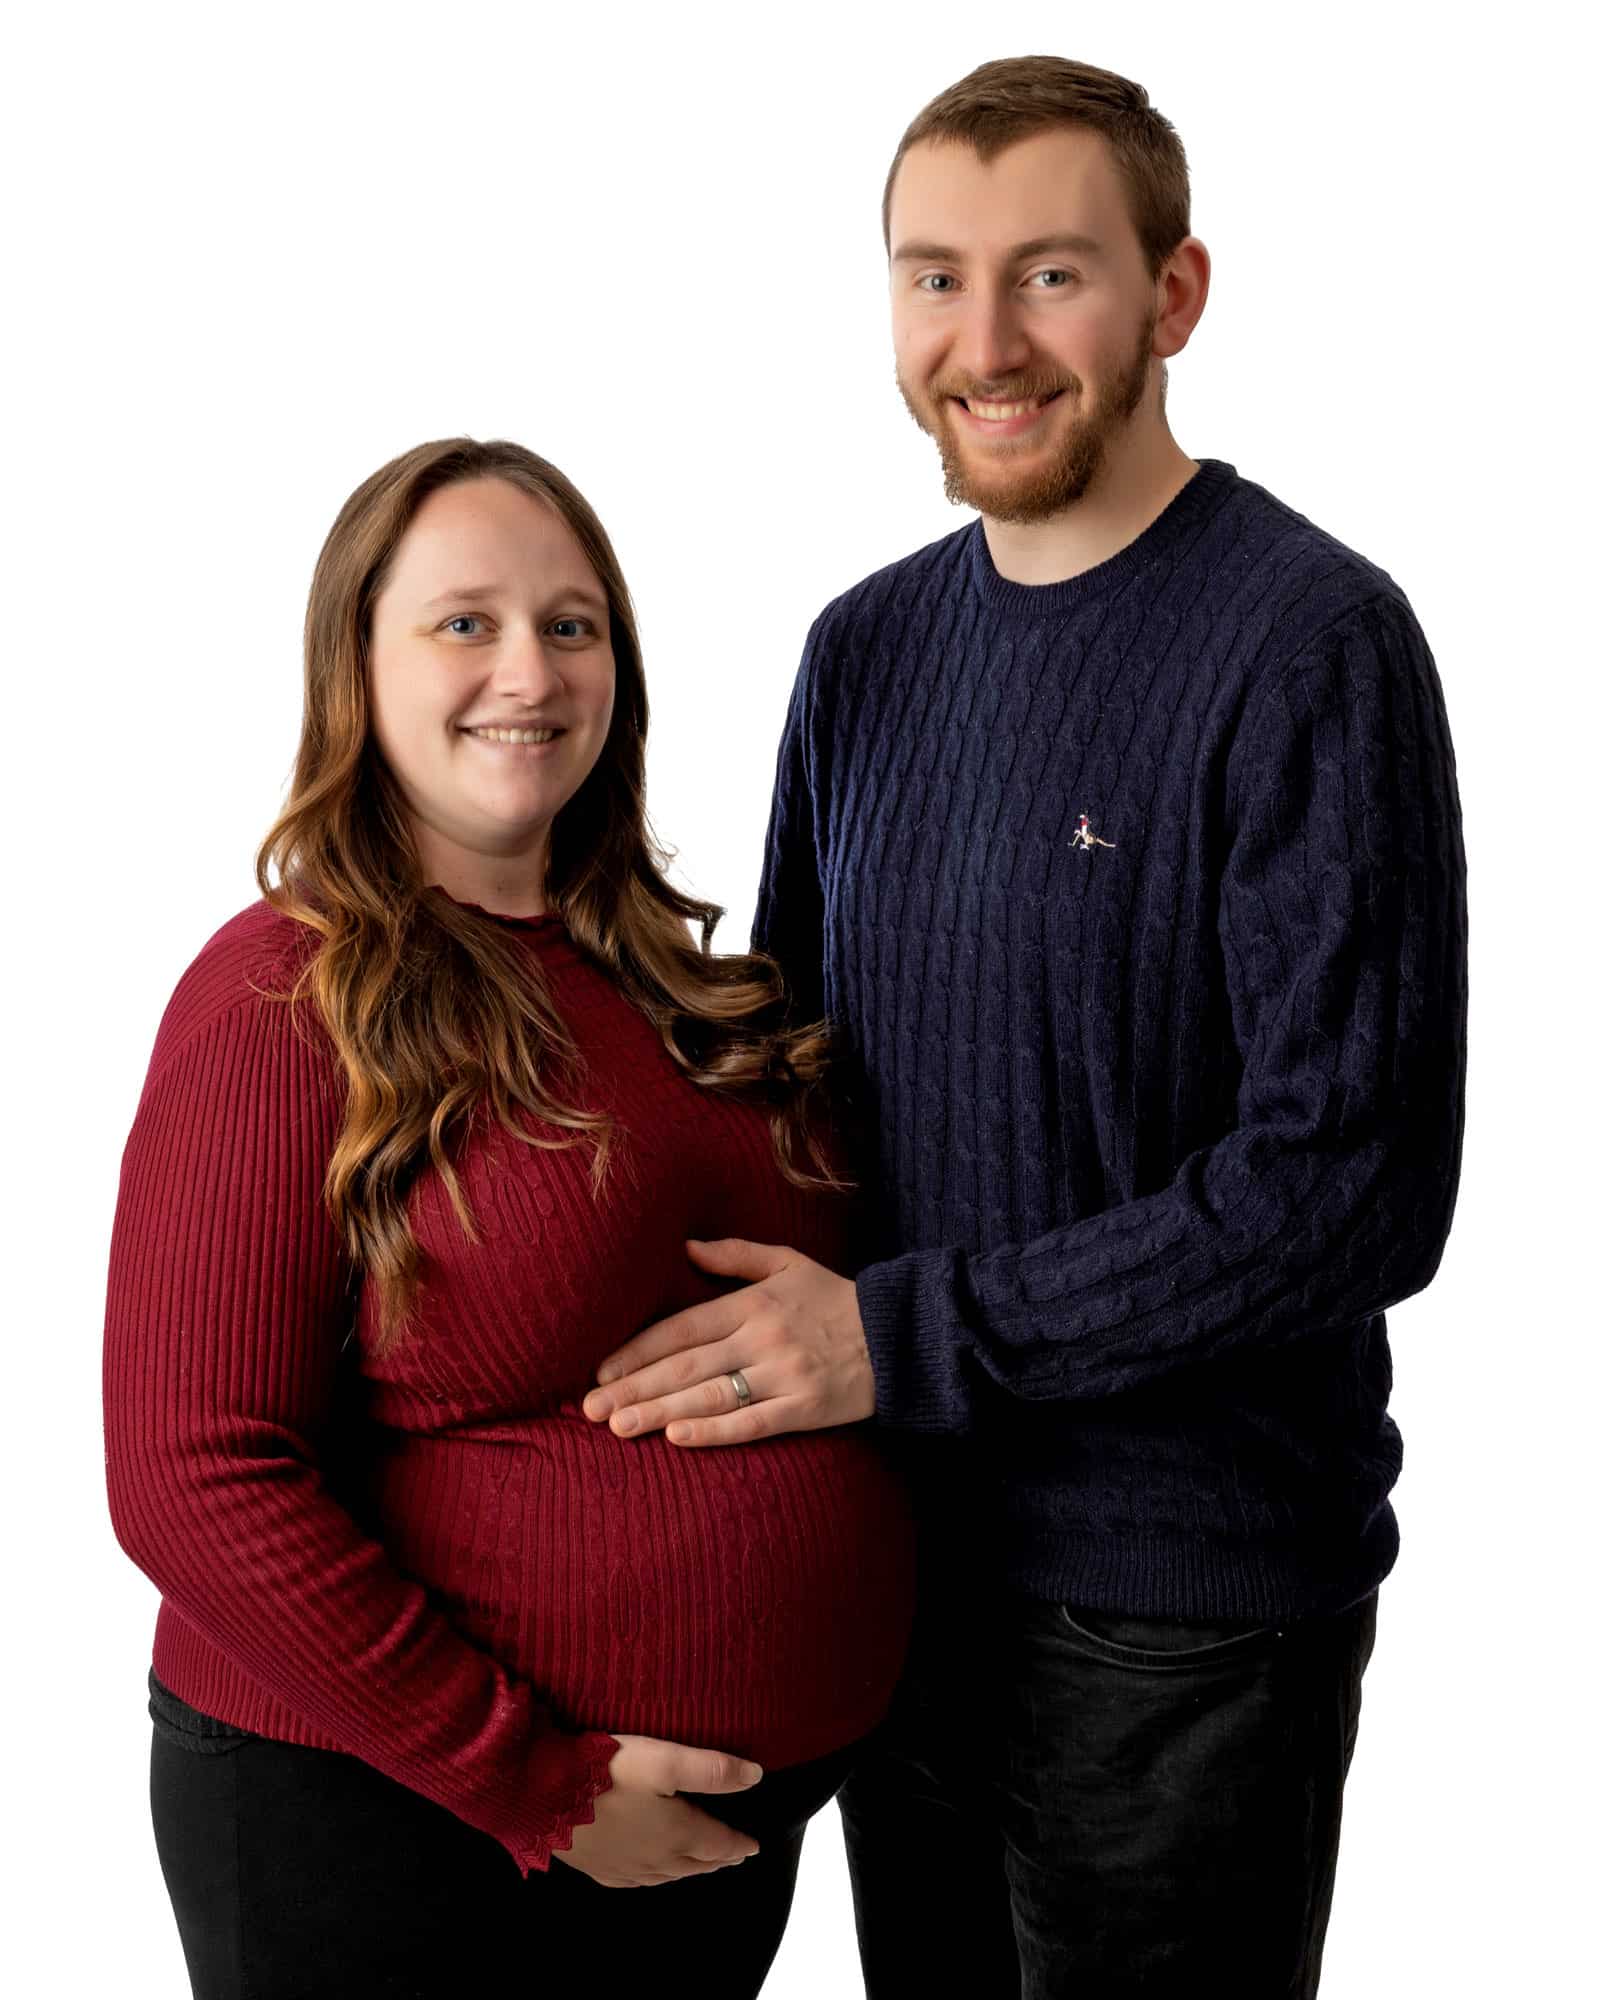 Pregnant lady with her partner during a maternity photosession